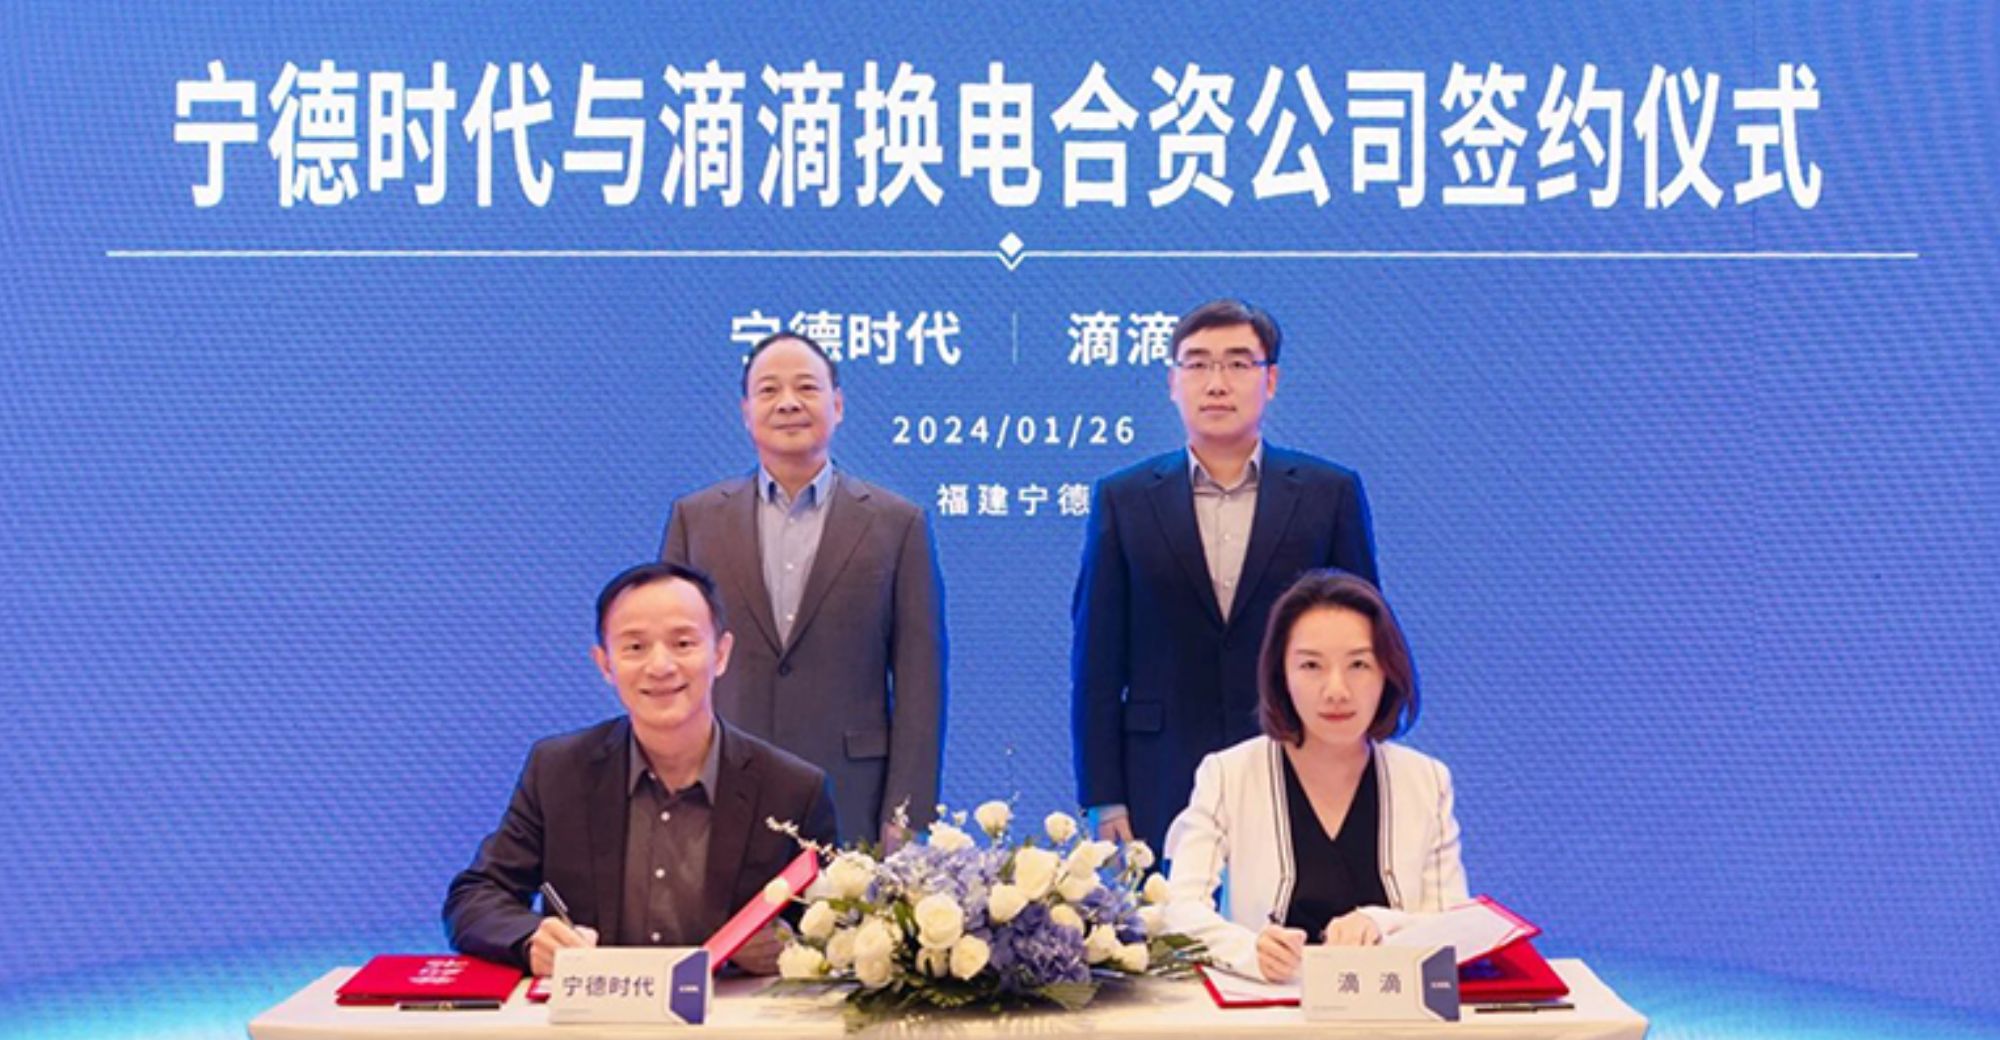 CATL and Didi Create a Joint Venture for Battery Swapping Services